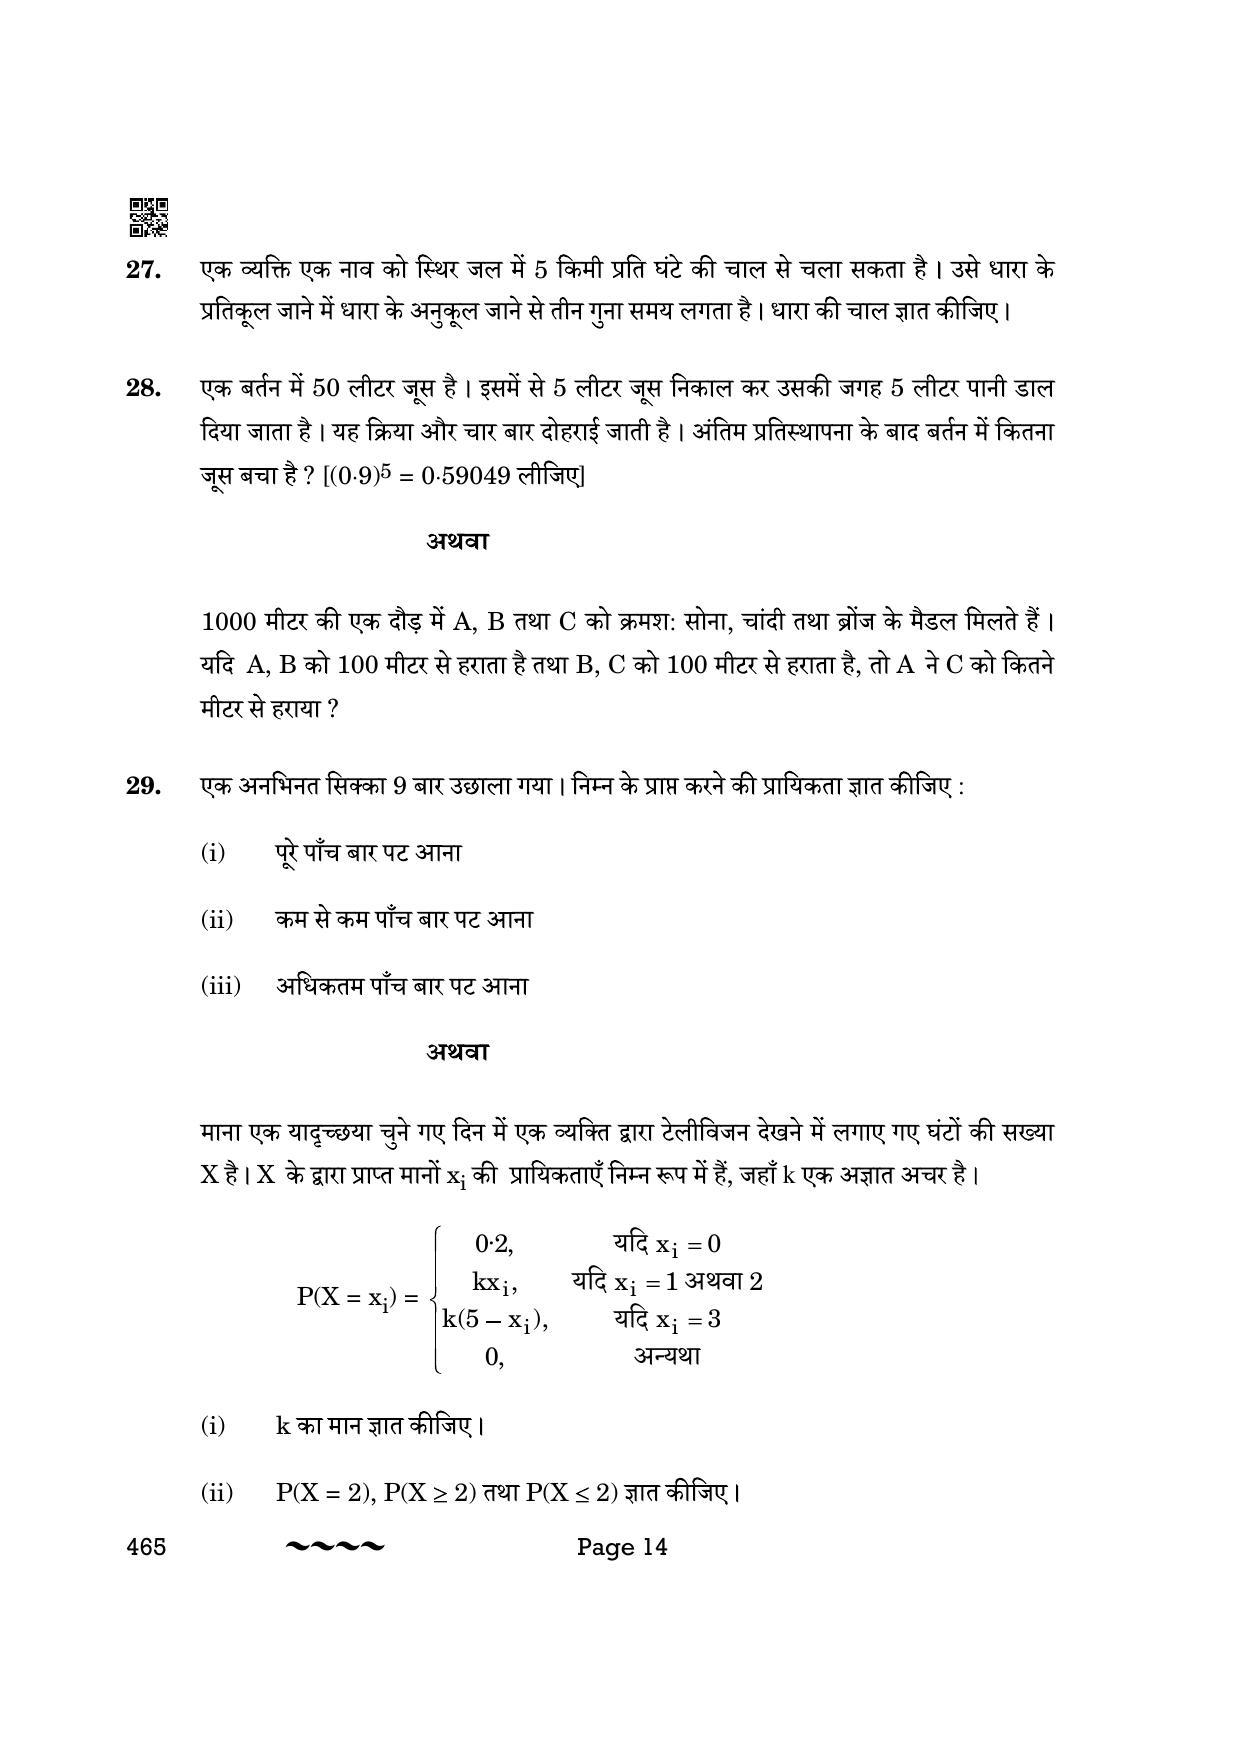 CBSE Class 12 465- Applied Mathematics 2023 (Compartment) Question Paper - Page 14